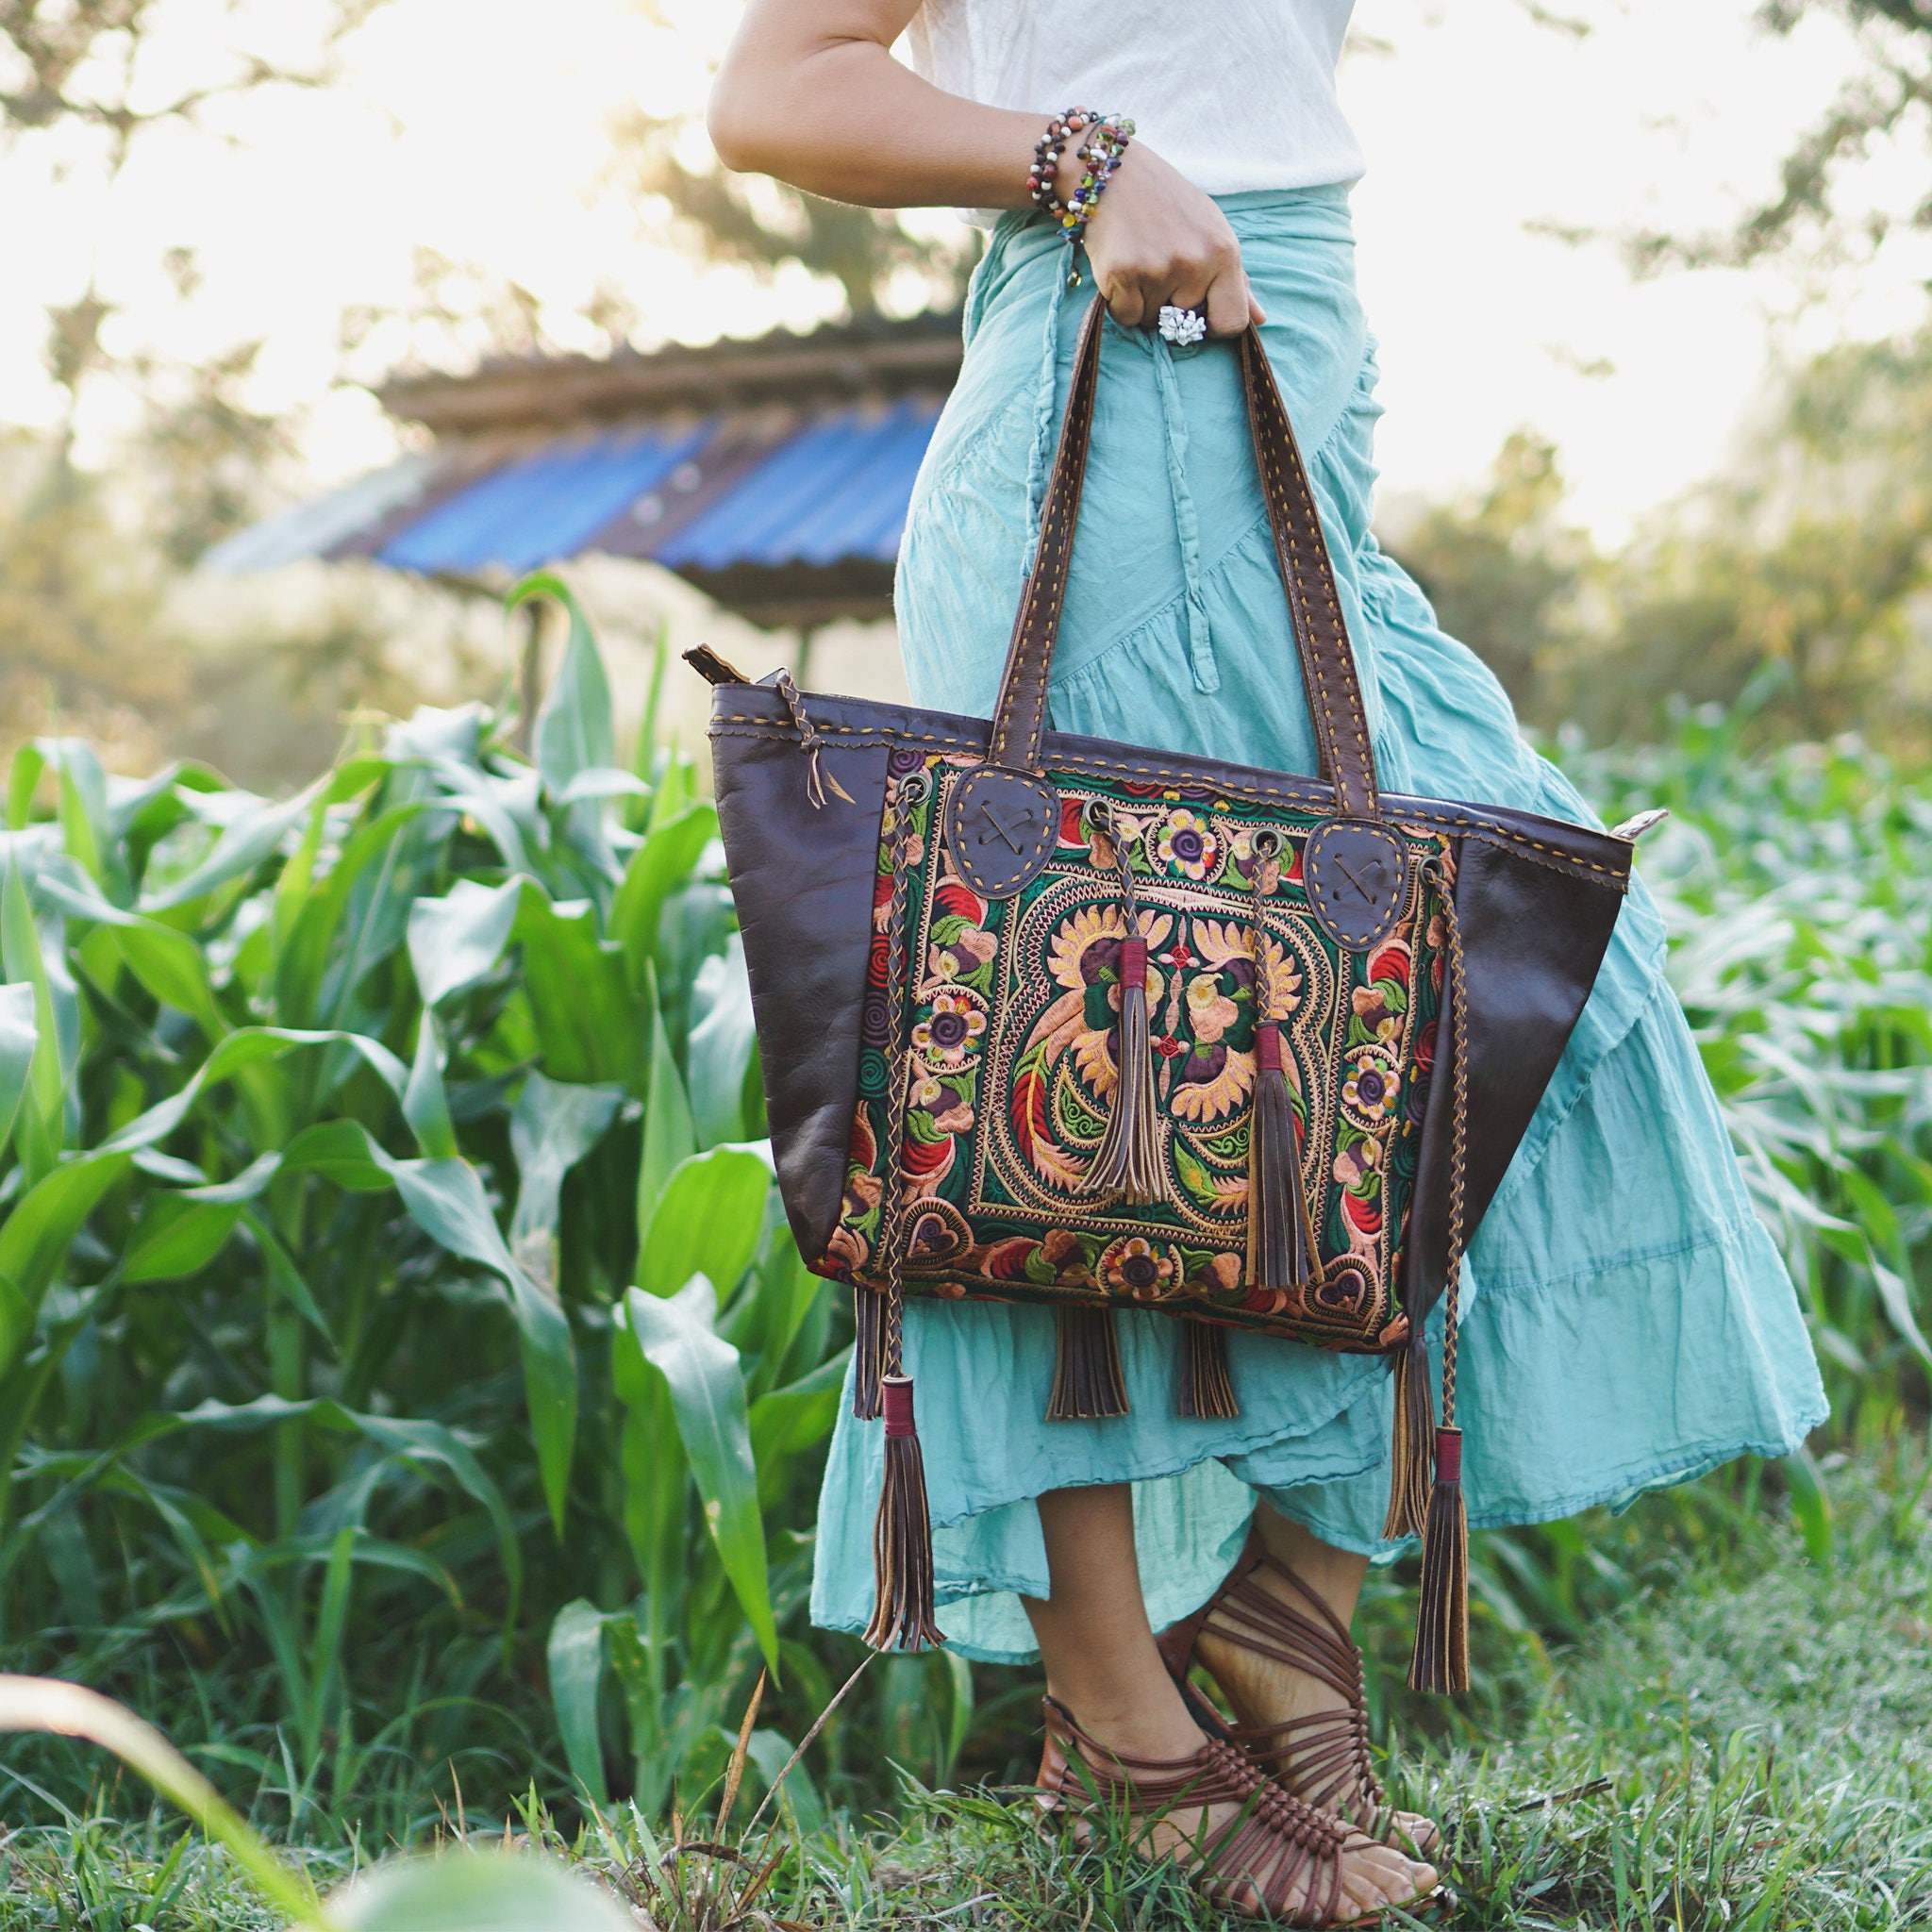 Totes Handbags & Shoulder Bags Changnoi One-of-a-Kind Boho Embroidered ...